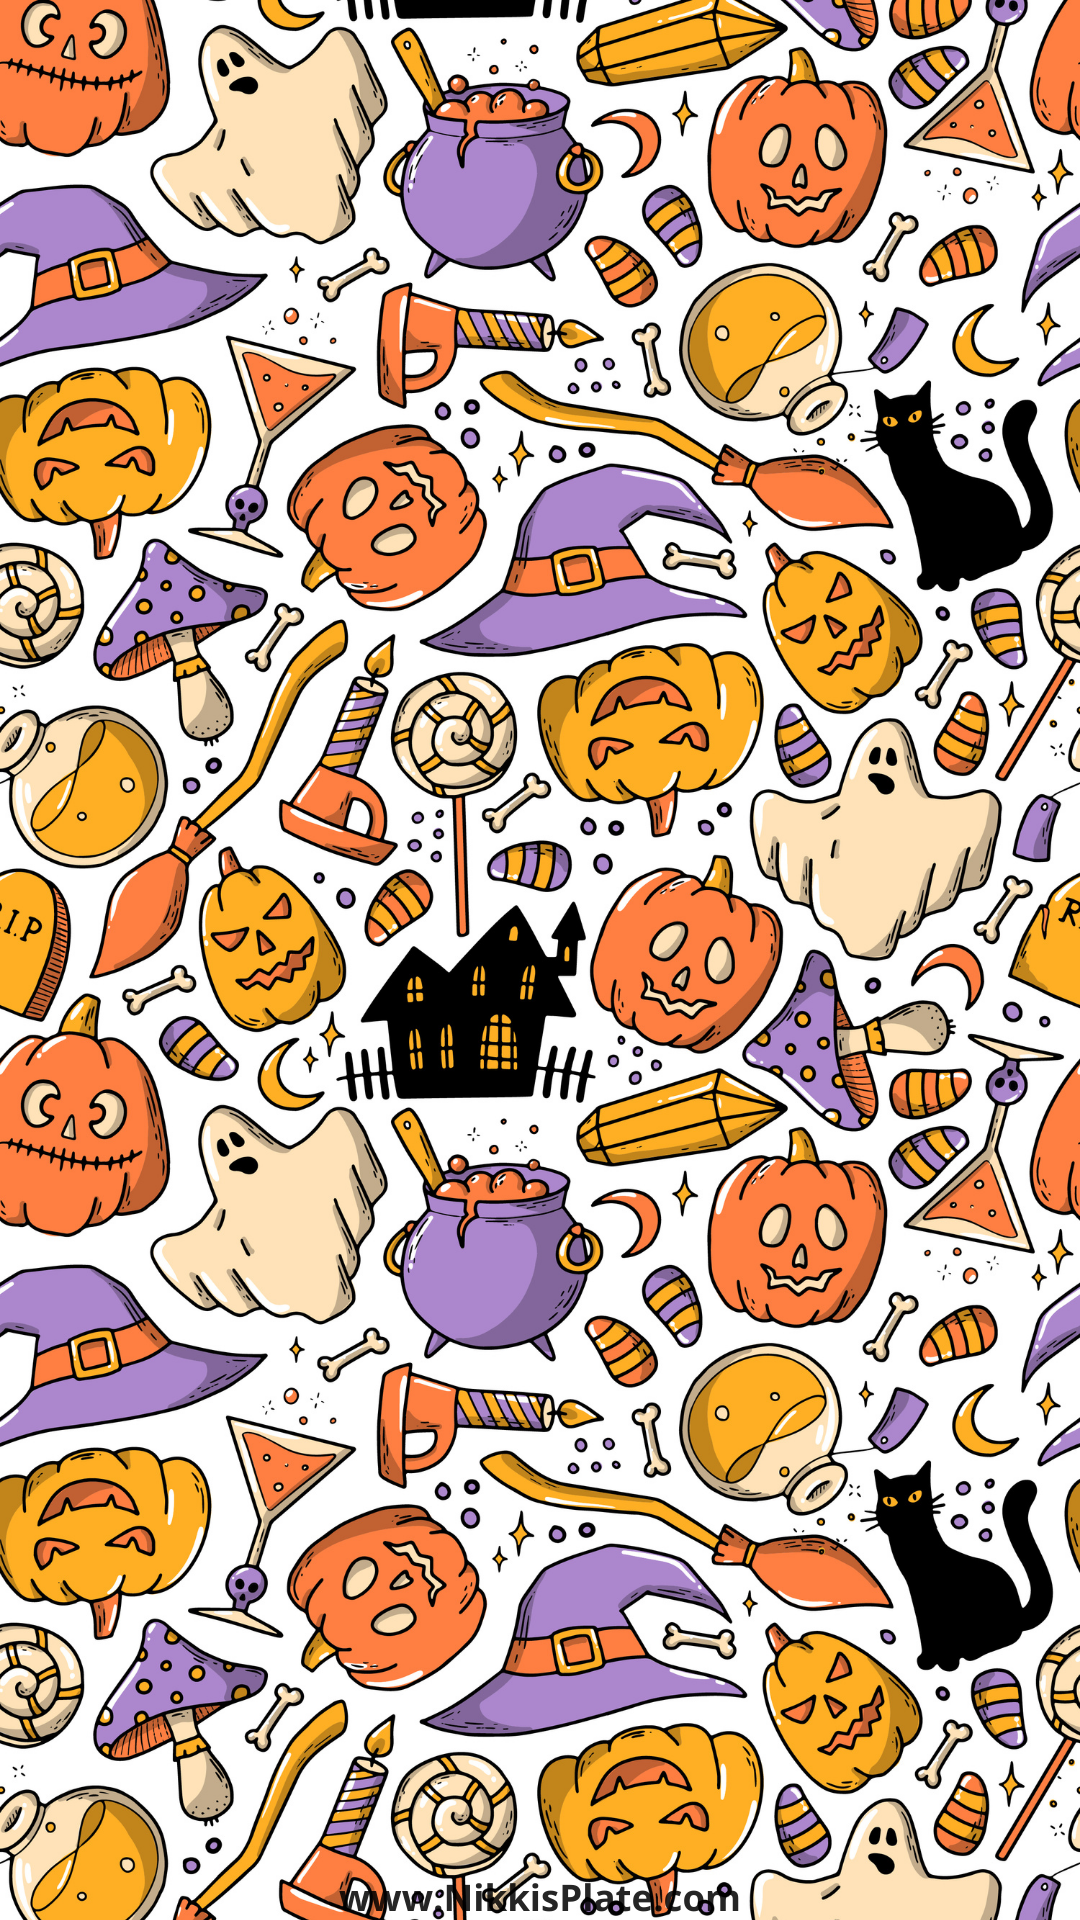 Get ready to add a spooky touch to your iPhone with my roundup of 30 cute Halloween iPhone Wallpaper Backgrounds. From cute pumpkins to eerie witches, I have something for everyone! Embrace the Halloween spirit—no cost, no tricks, just visually appealing treats. Dazzle your screen with Halloween wallpaper iPhone backgrounds if you dare!